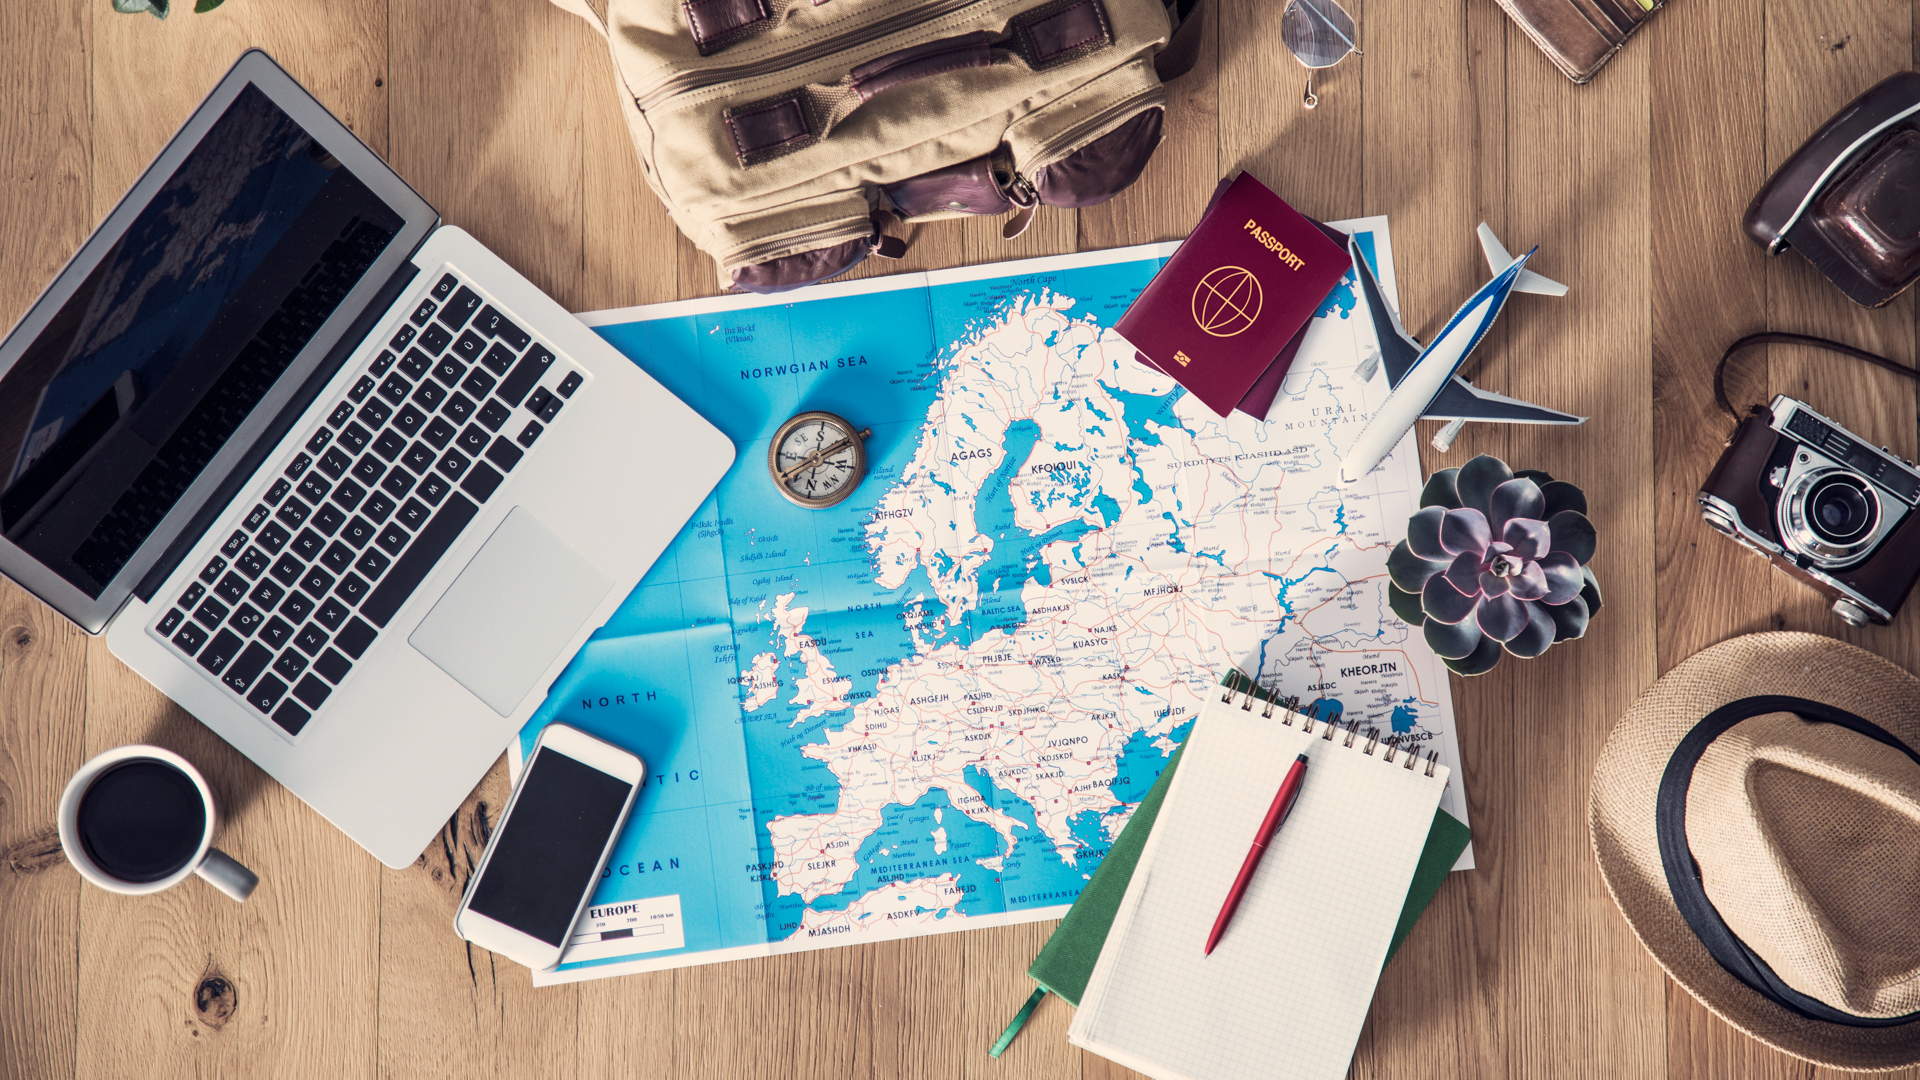 Travel Websites: The Future of Travel Planning